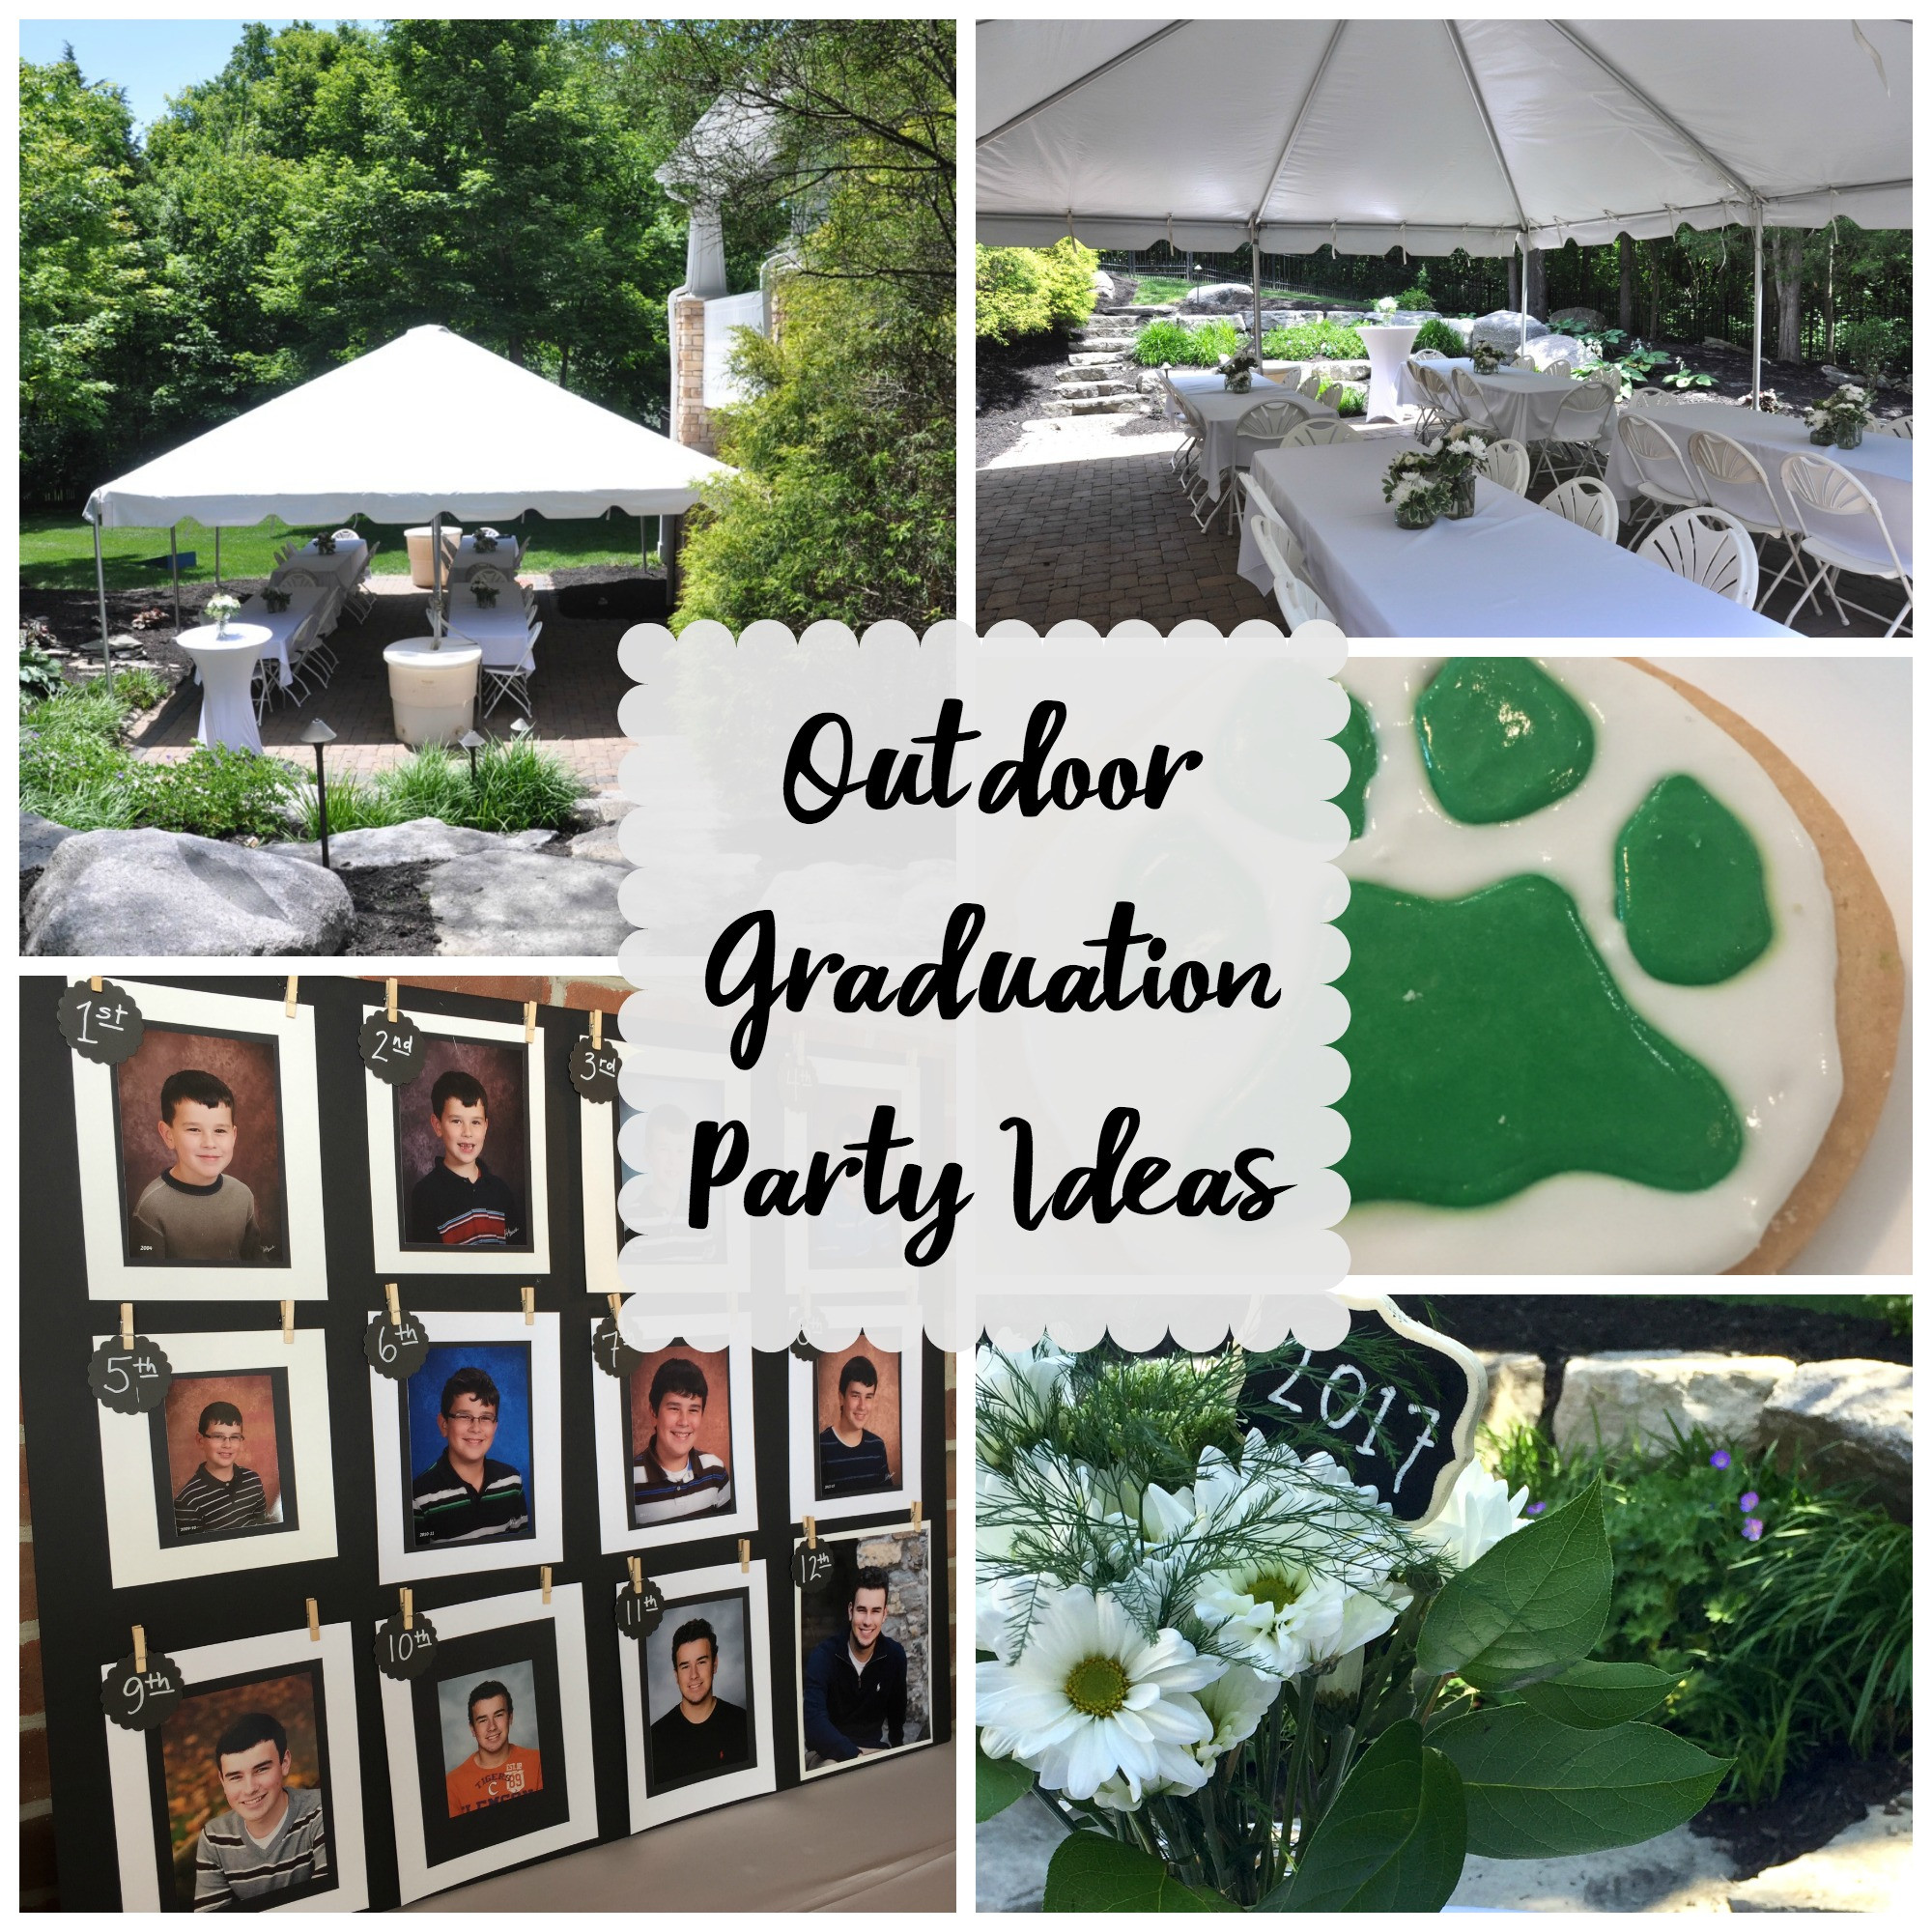 Chic Simple Backyard Graduation Party Decorating Ideas
 Outdoor Graduation Party Evolution of Style